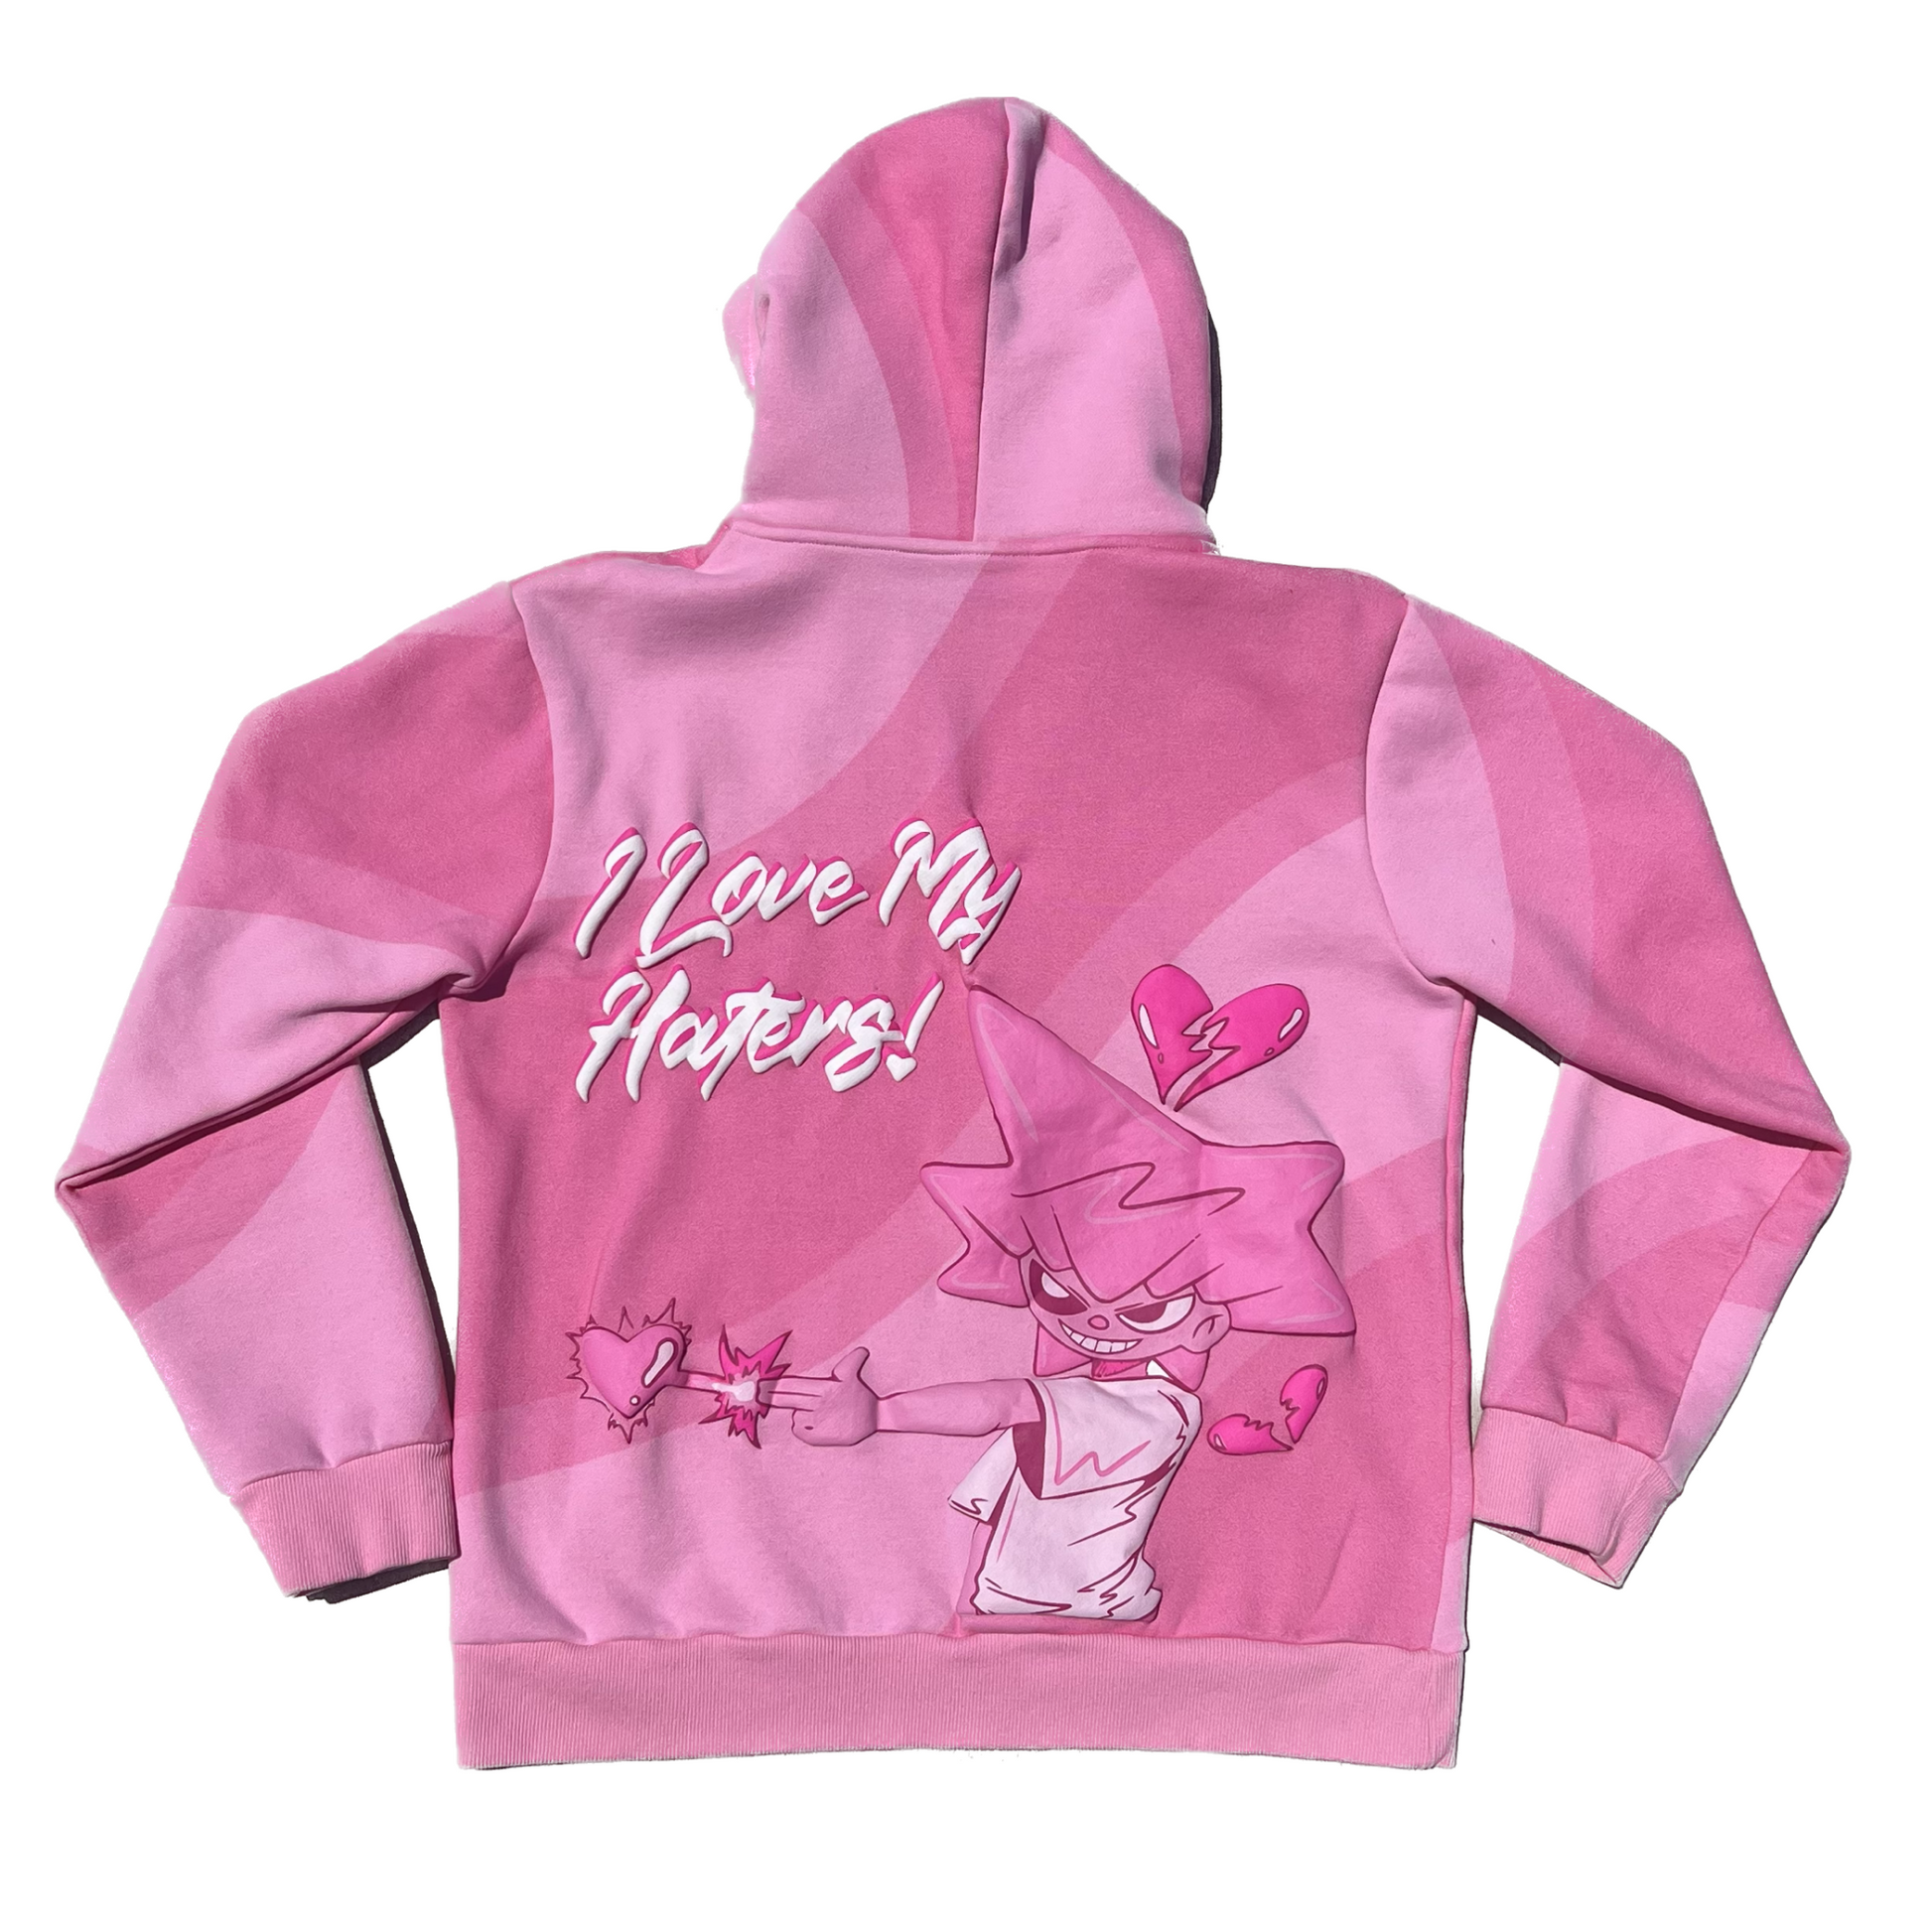 Love My Haters Hoodie, Pink – All Angels Clothing